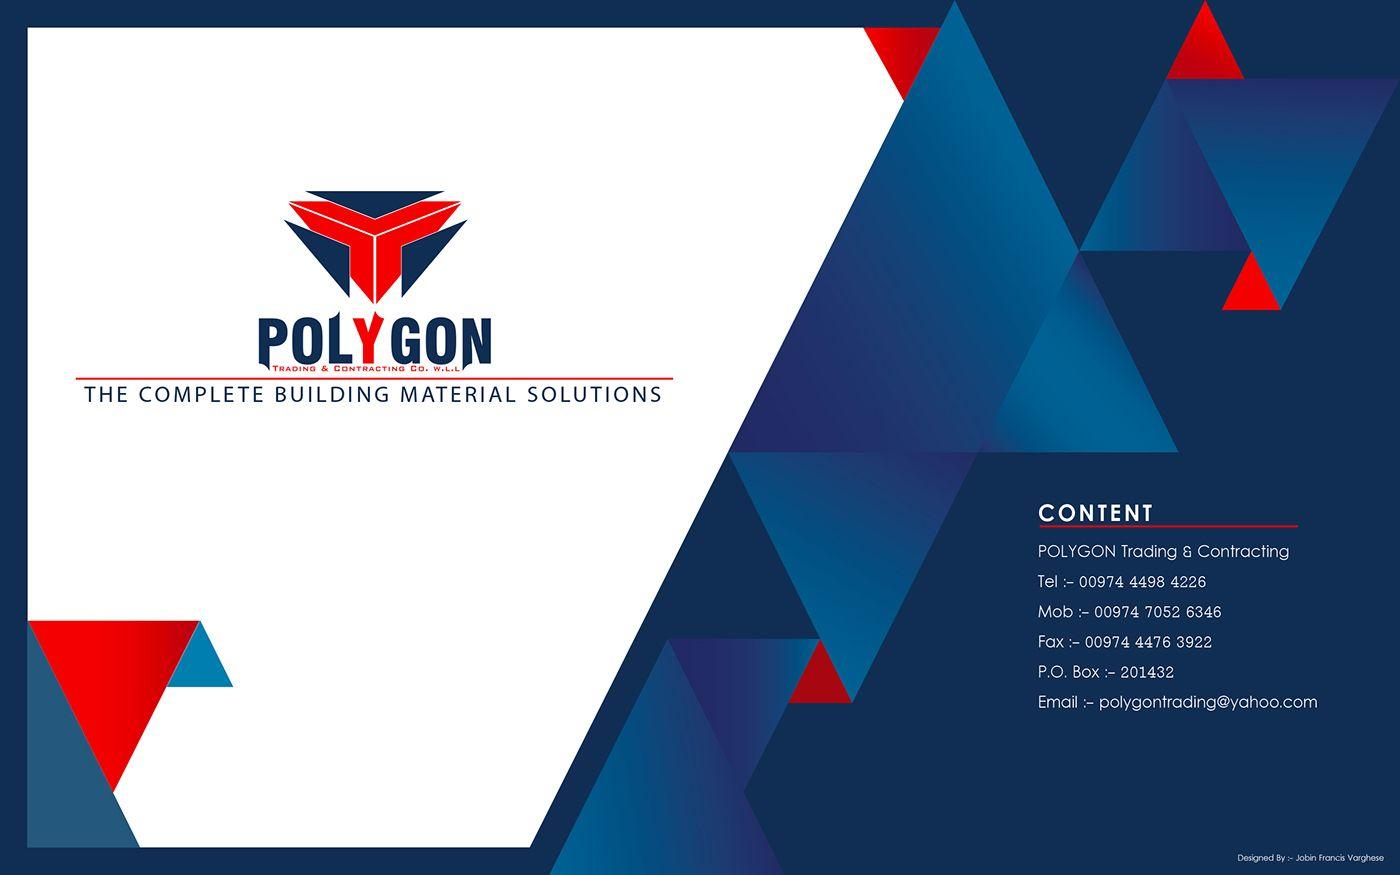 Polygon with a Blue P Logo - POLYGON TRADING & CONTRACTING PROFILE. on Behance